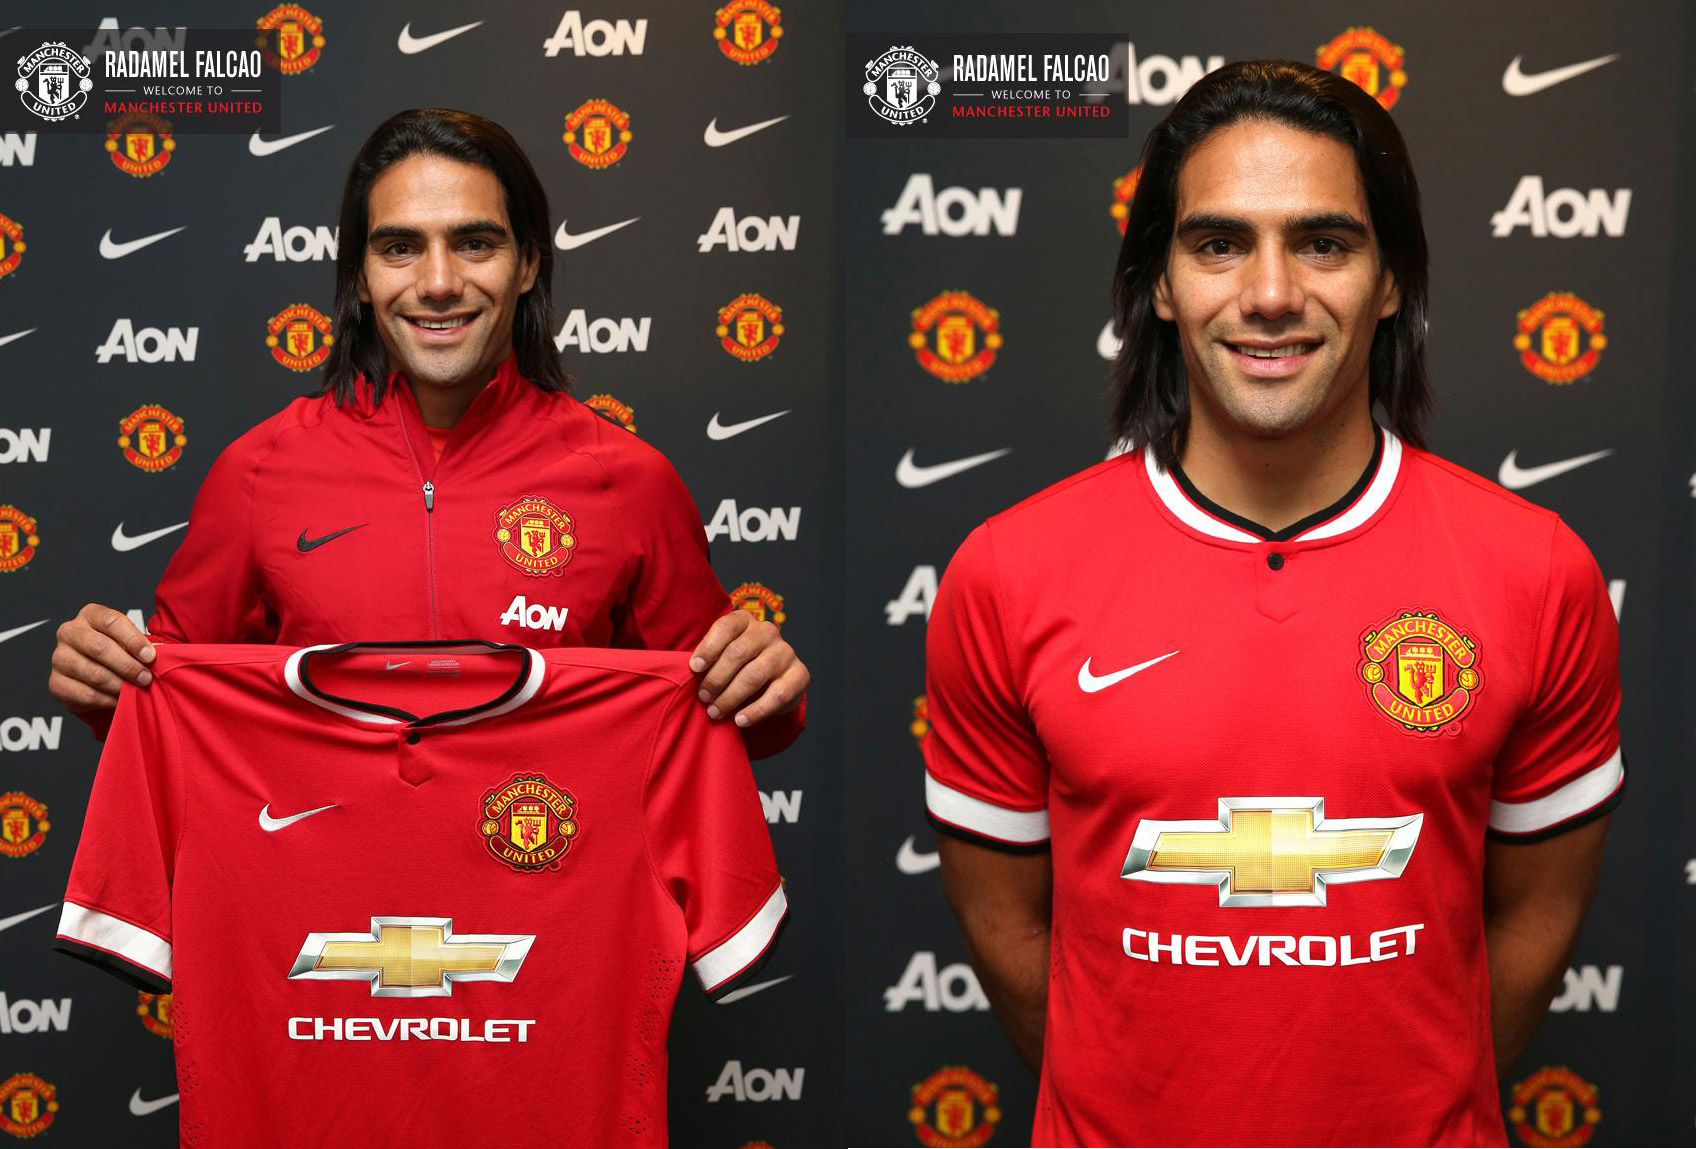 salaire Falcao Manchester United